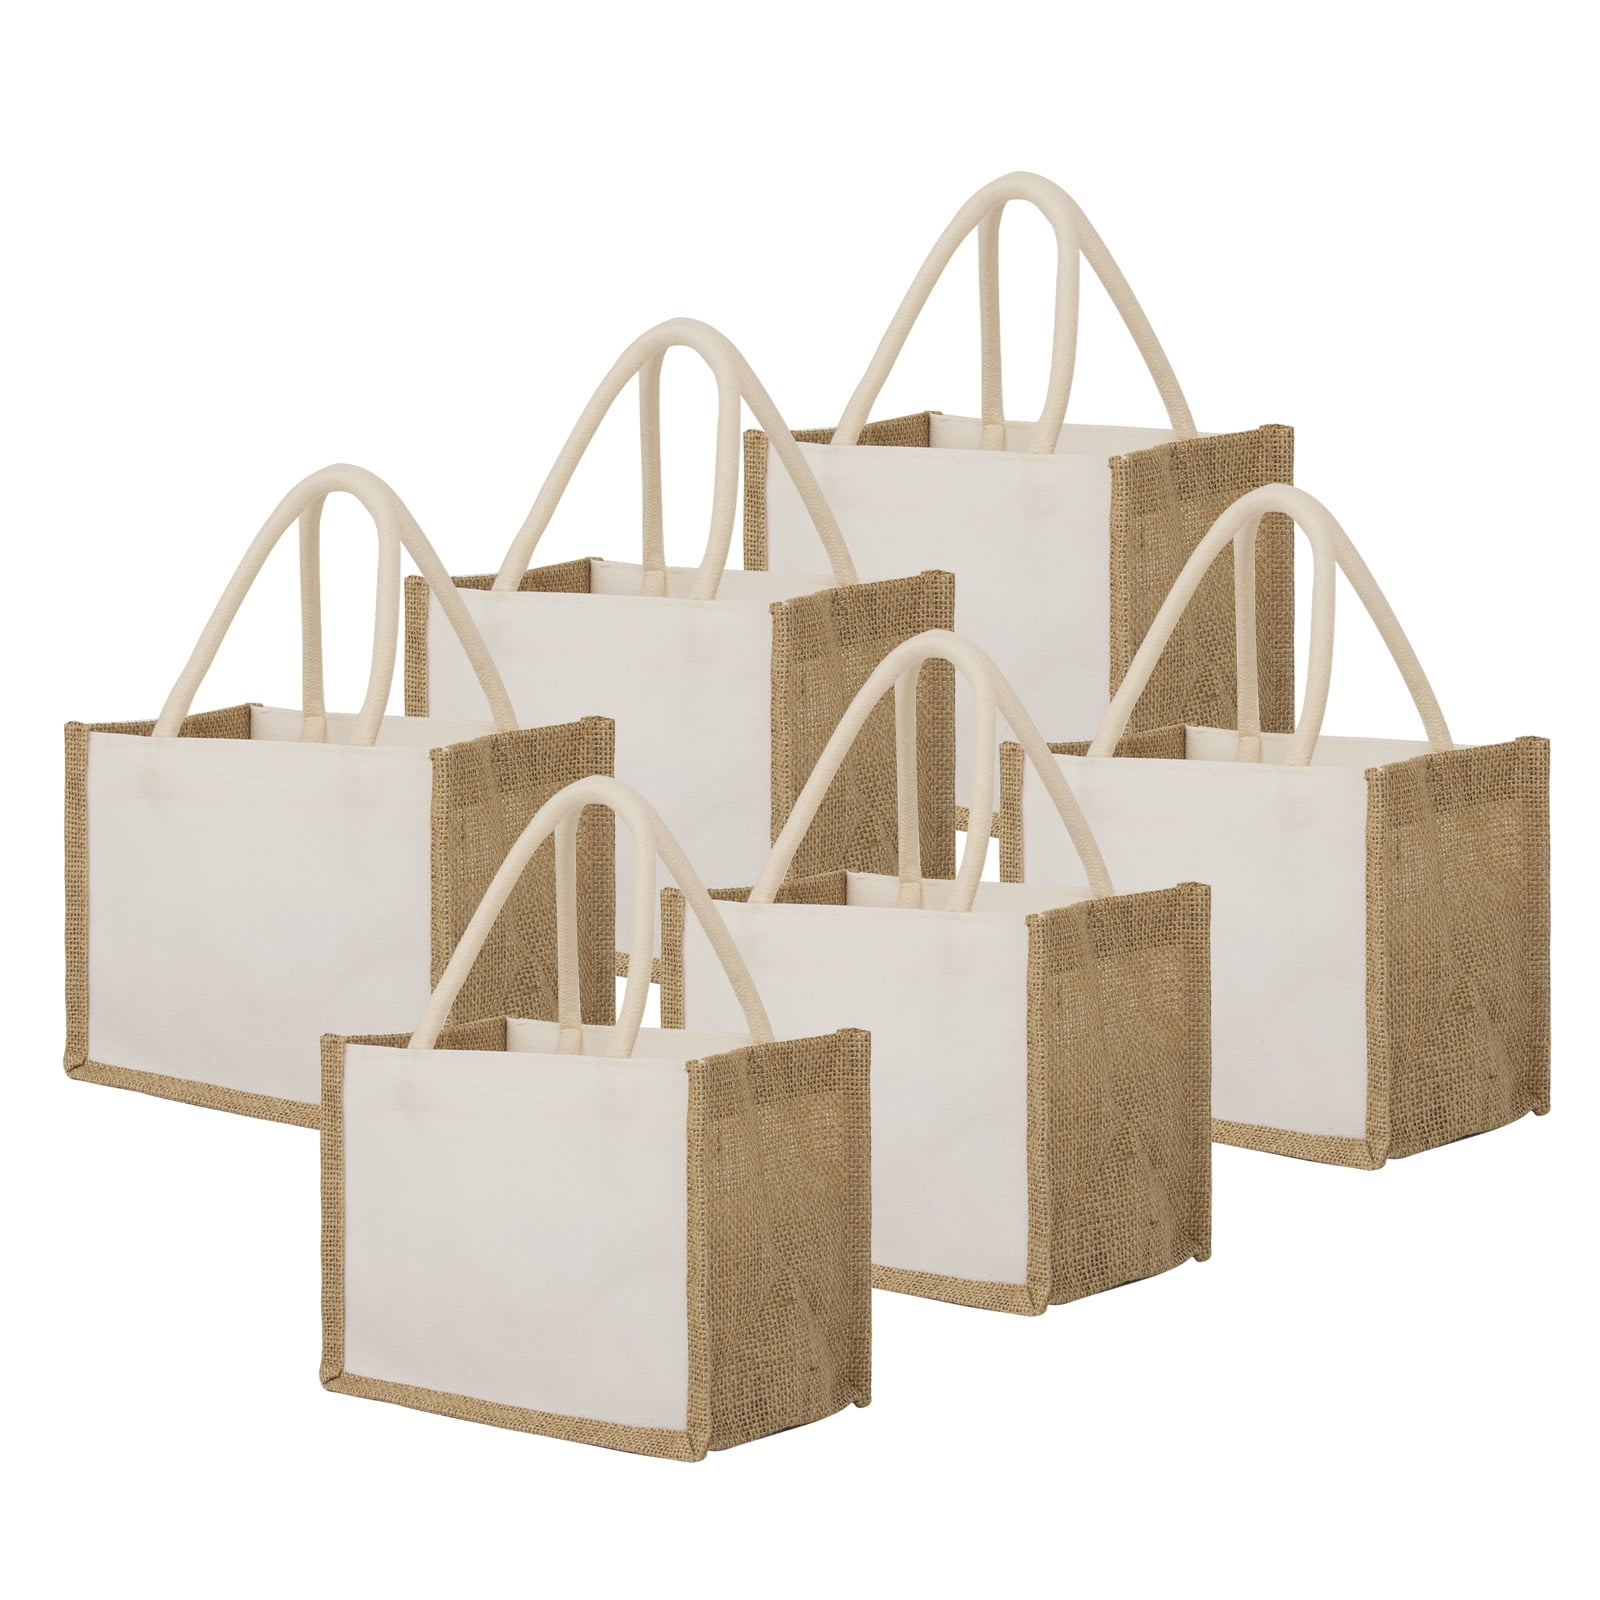 Segarty Canvas Tote Bag, 6 Pack 18x15 Blank Canvas Totes for Women,  Reusable Canvas Bags Aesthetic with Natural Cotton and Shoulder Strap, Bulk  for